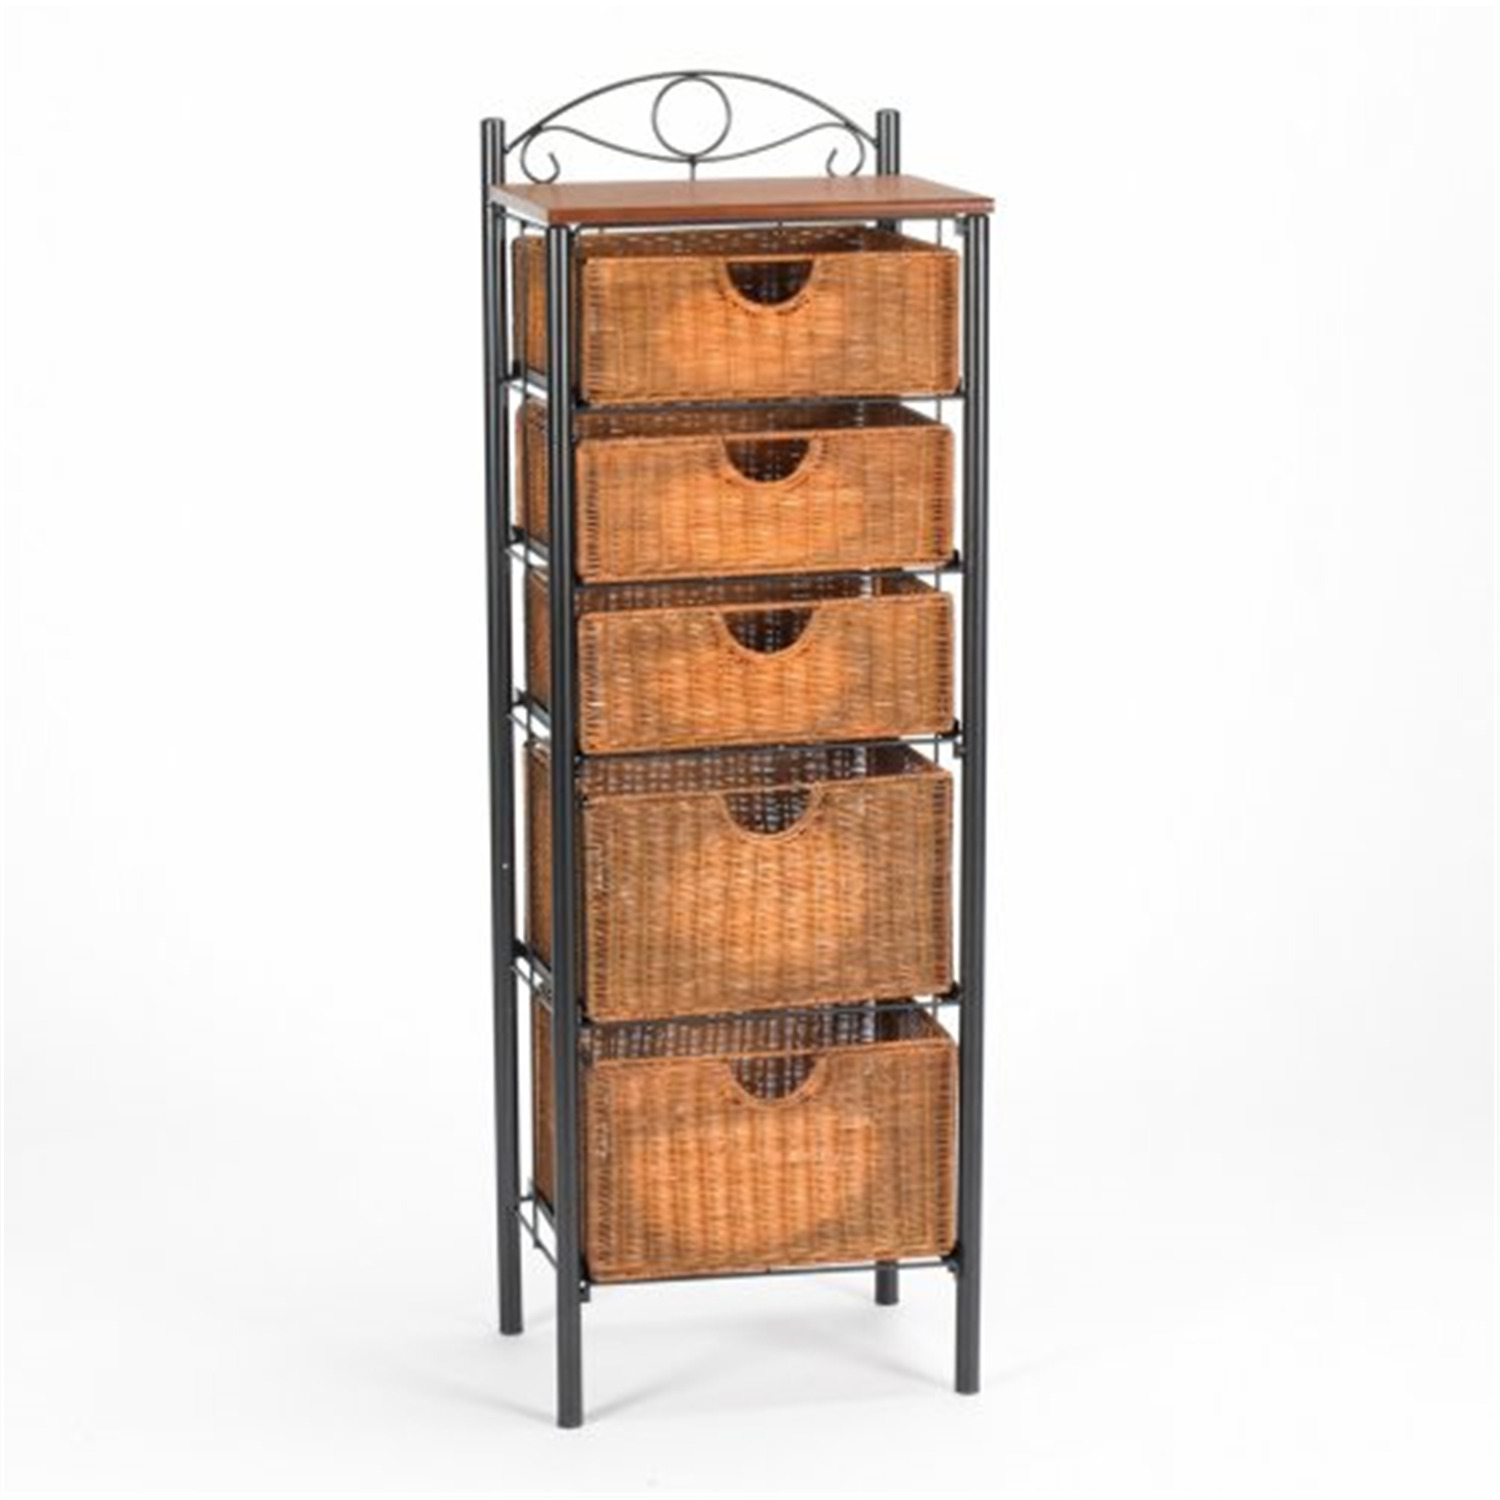 Southern Enterprises Iron and Wicker Five-Drawer Unit - image 1 of 8